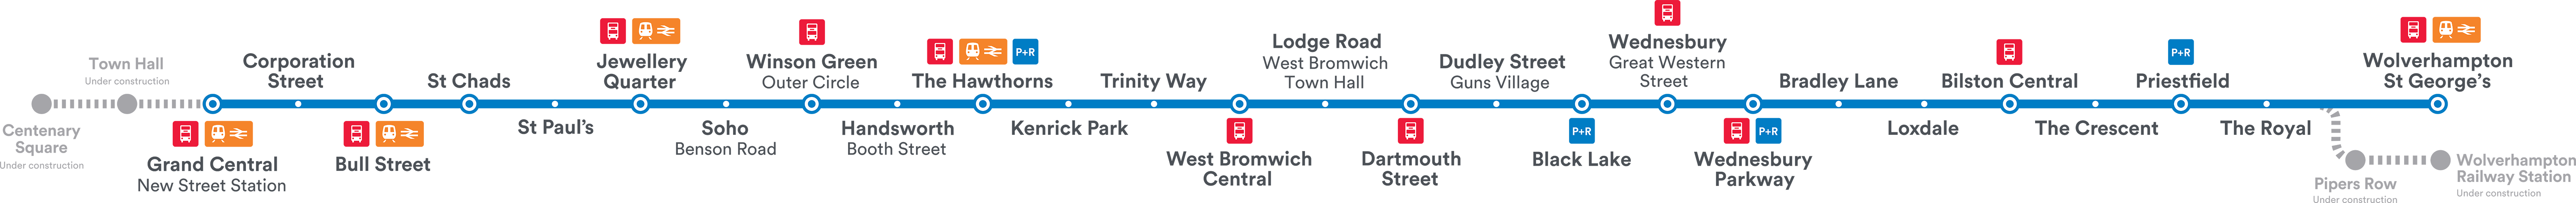 West Midlands Metro Route Map